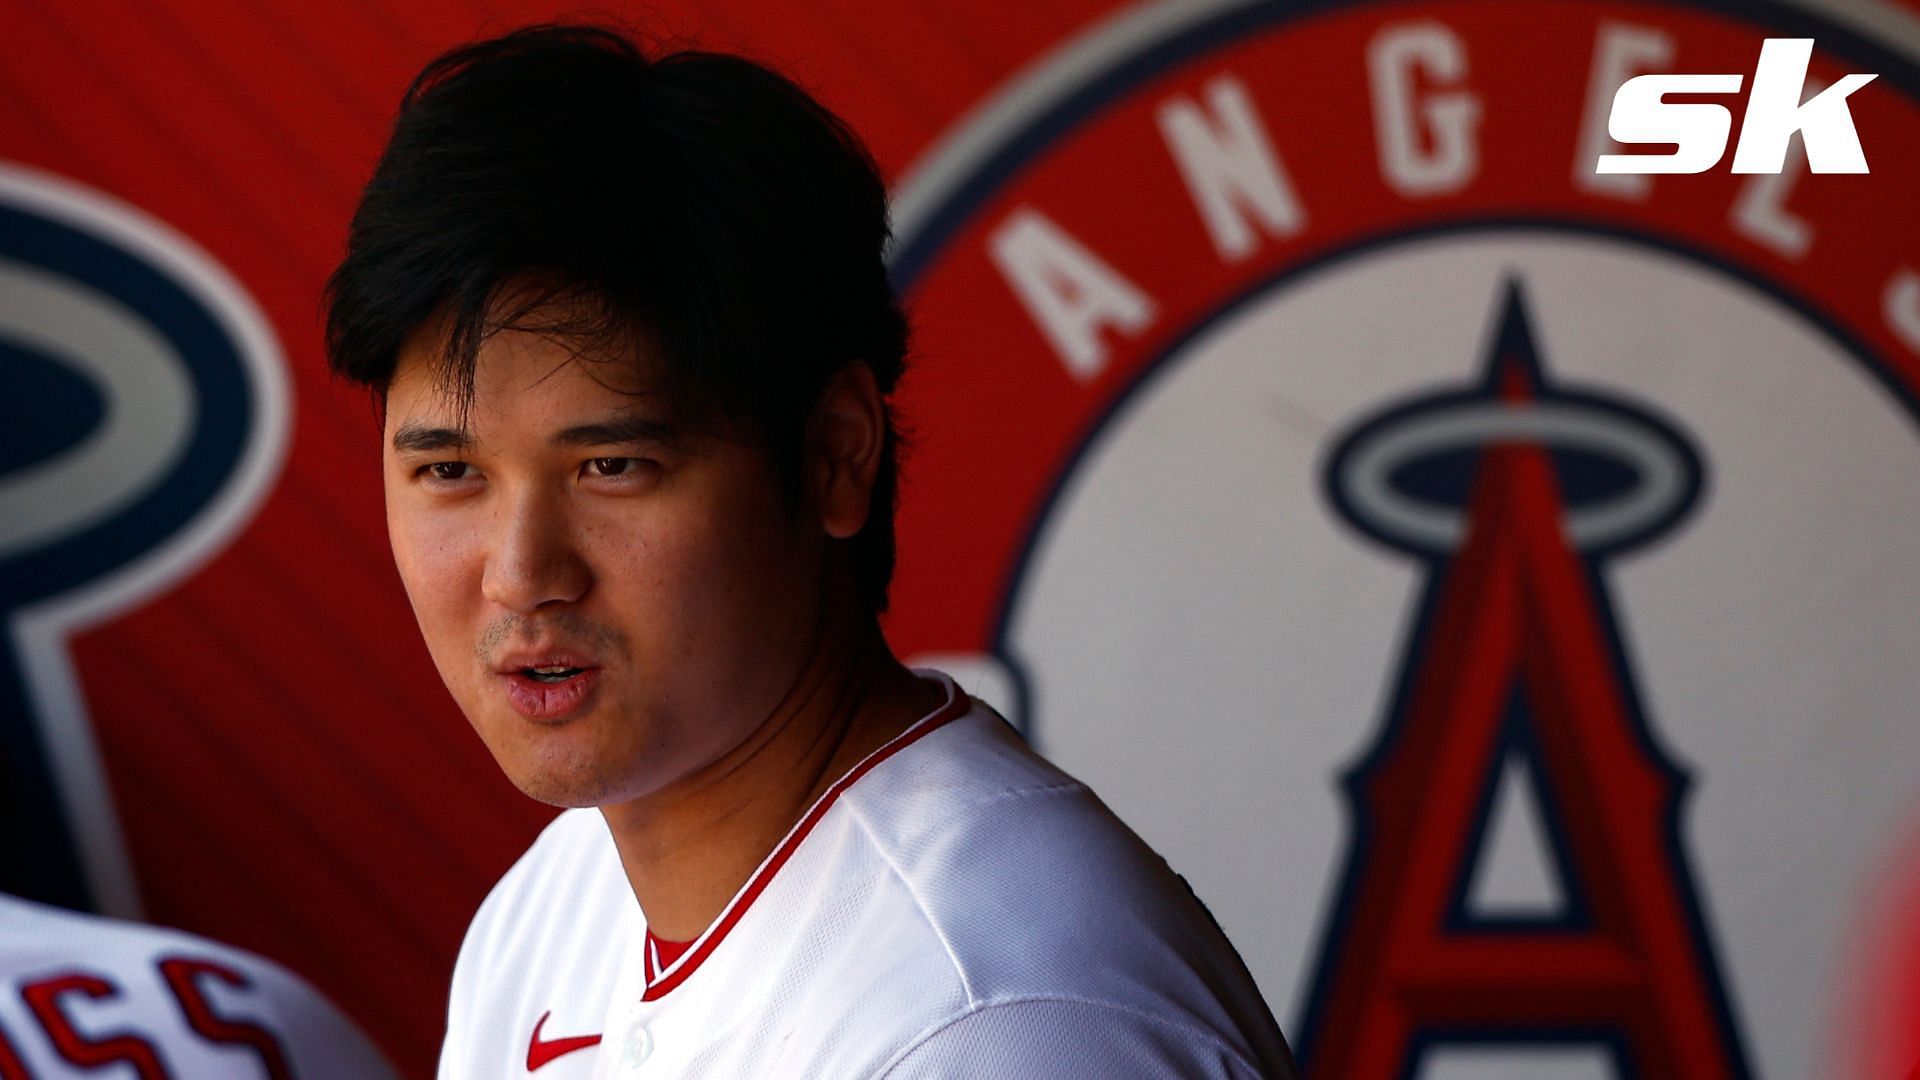 Shohei Ohtani revealed that he loves to sleep as his favorite hobby off the field